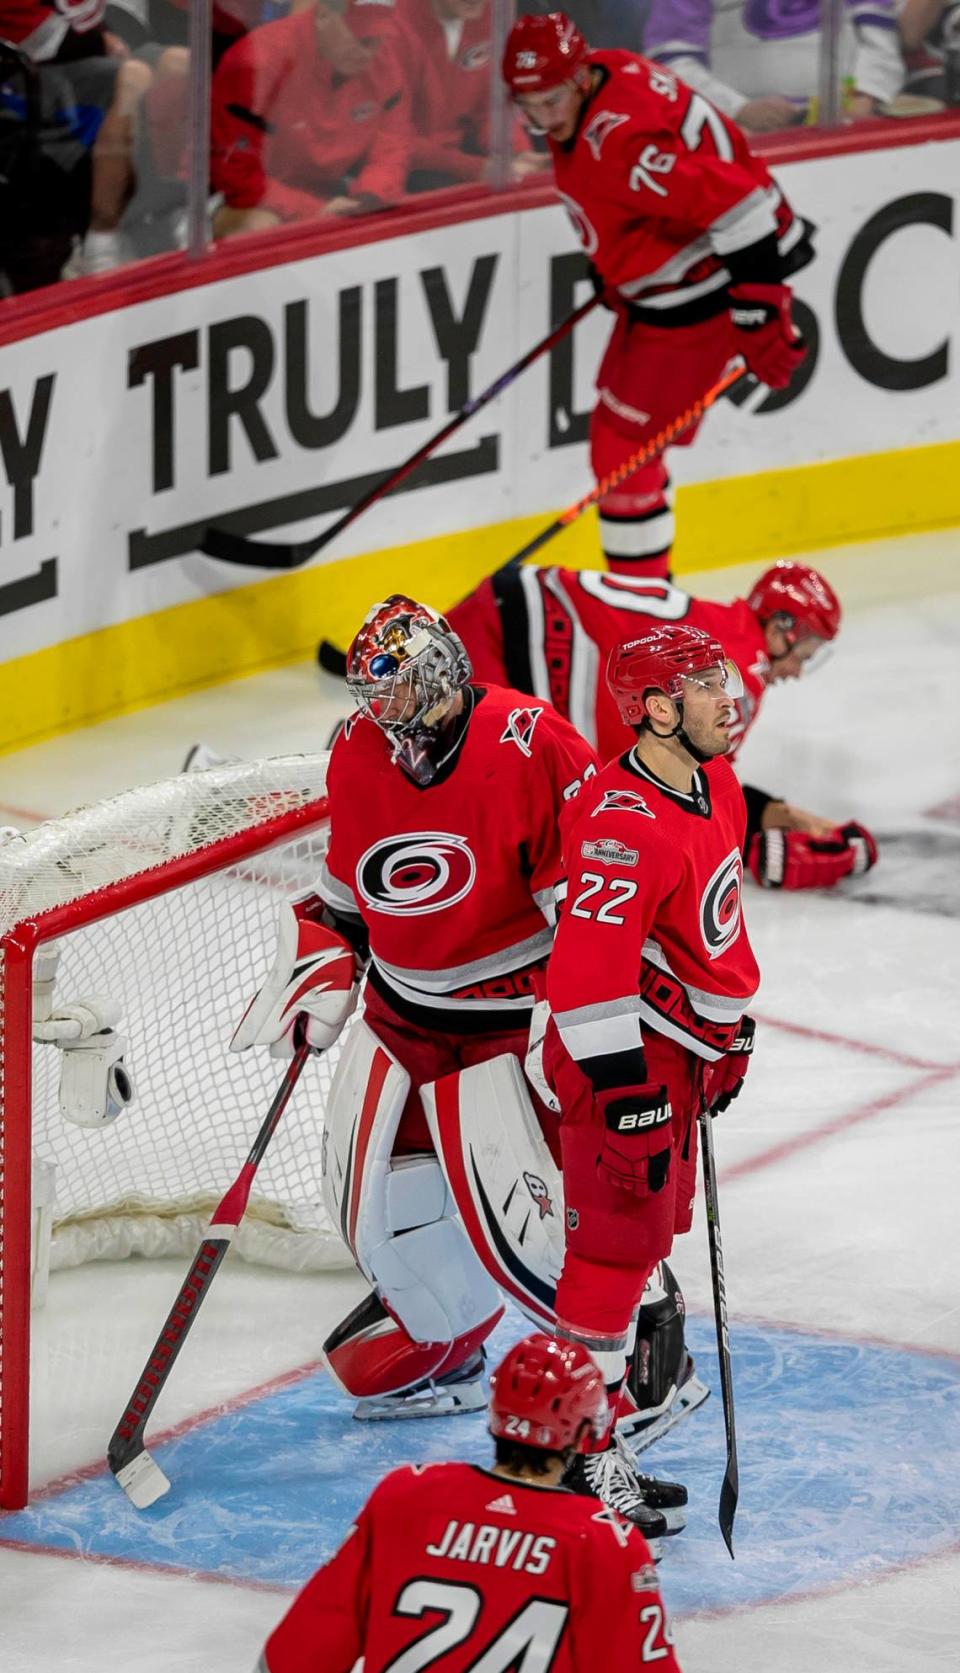 The Carolina Hurricanes Brett Pesce (22) checks the video replay after a goal by New York Islanders Brock Nelson (29). The initial shot hit the Carolina Hurricanes Sebastian Aho (20) in the face, falling perfectly for Nelson in the first period during Game 5 of their Stanley Cup series on Tuesday, April 25, 2023 at PNC Arena in Raleigh, N.C.